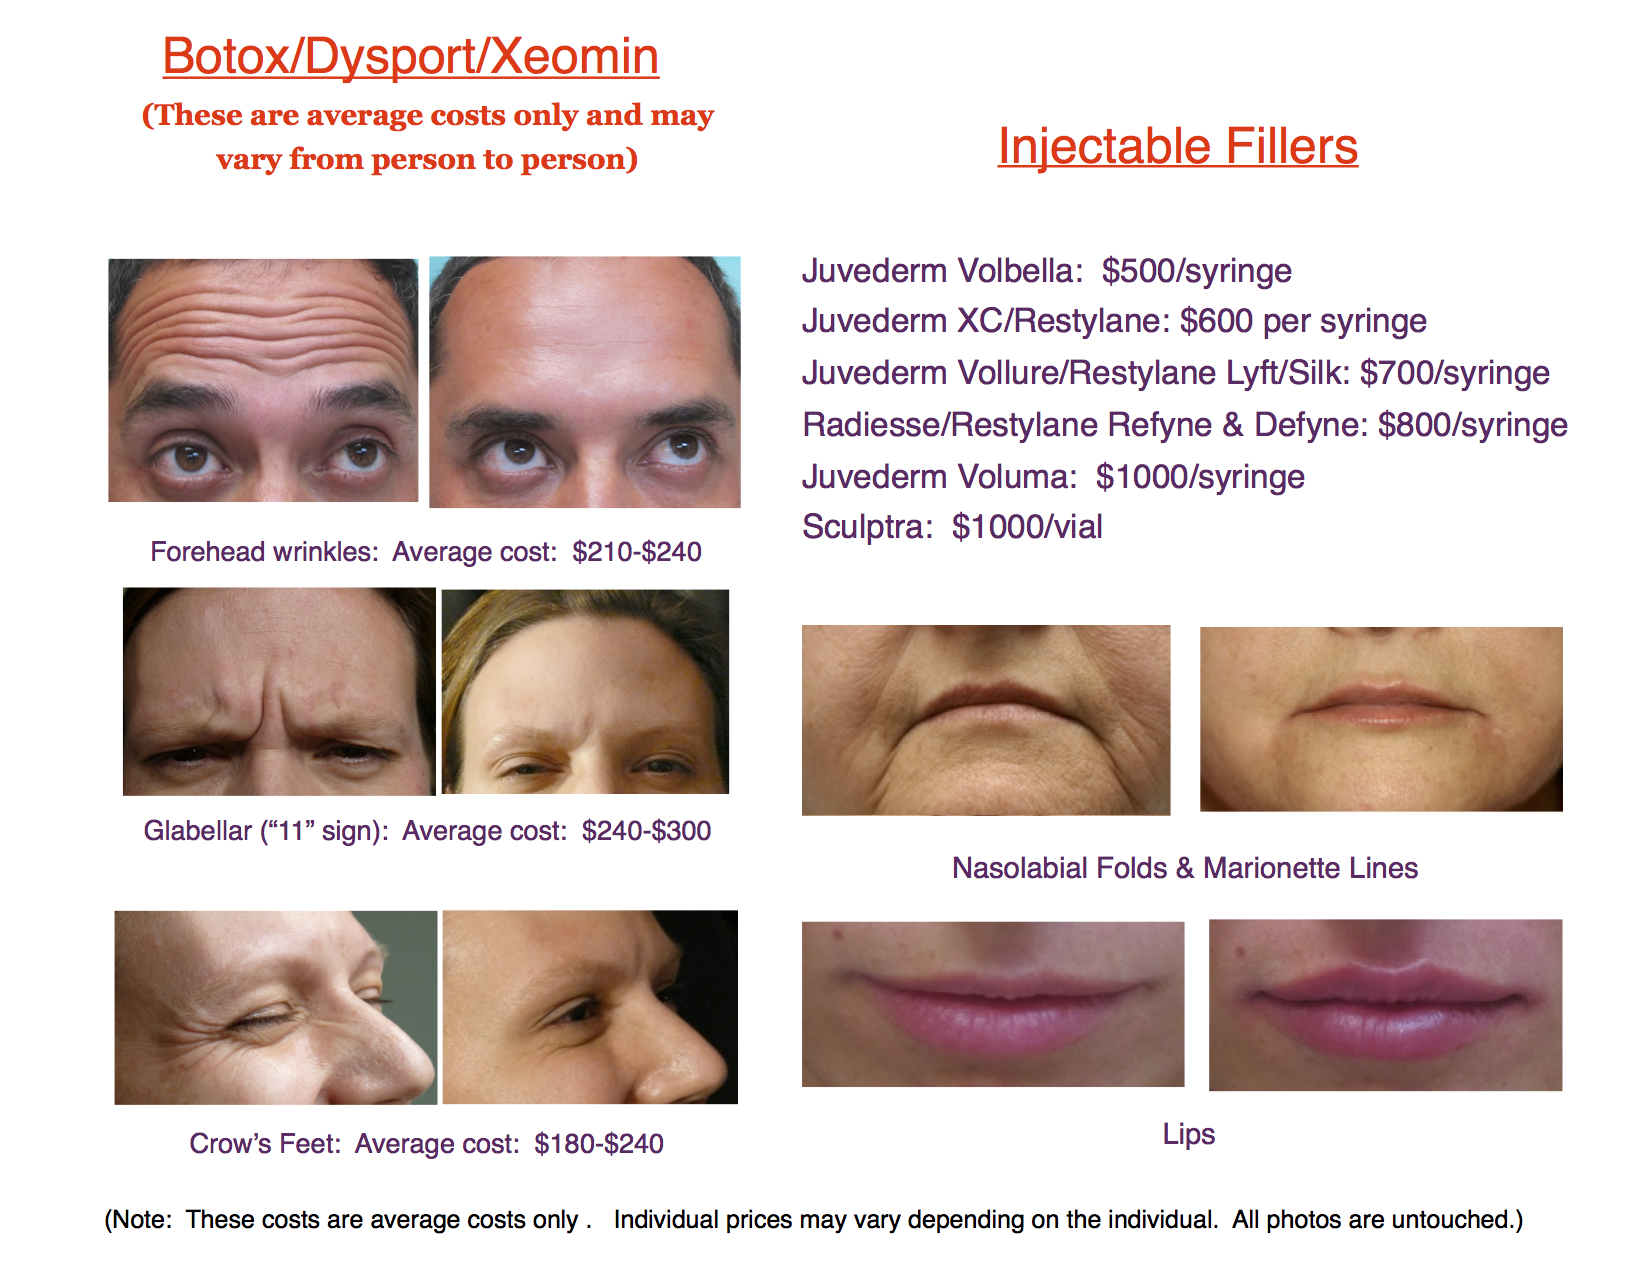 Prices for Botox, Dysport, Xeomin and Injectable Fillers in Honolulu